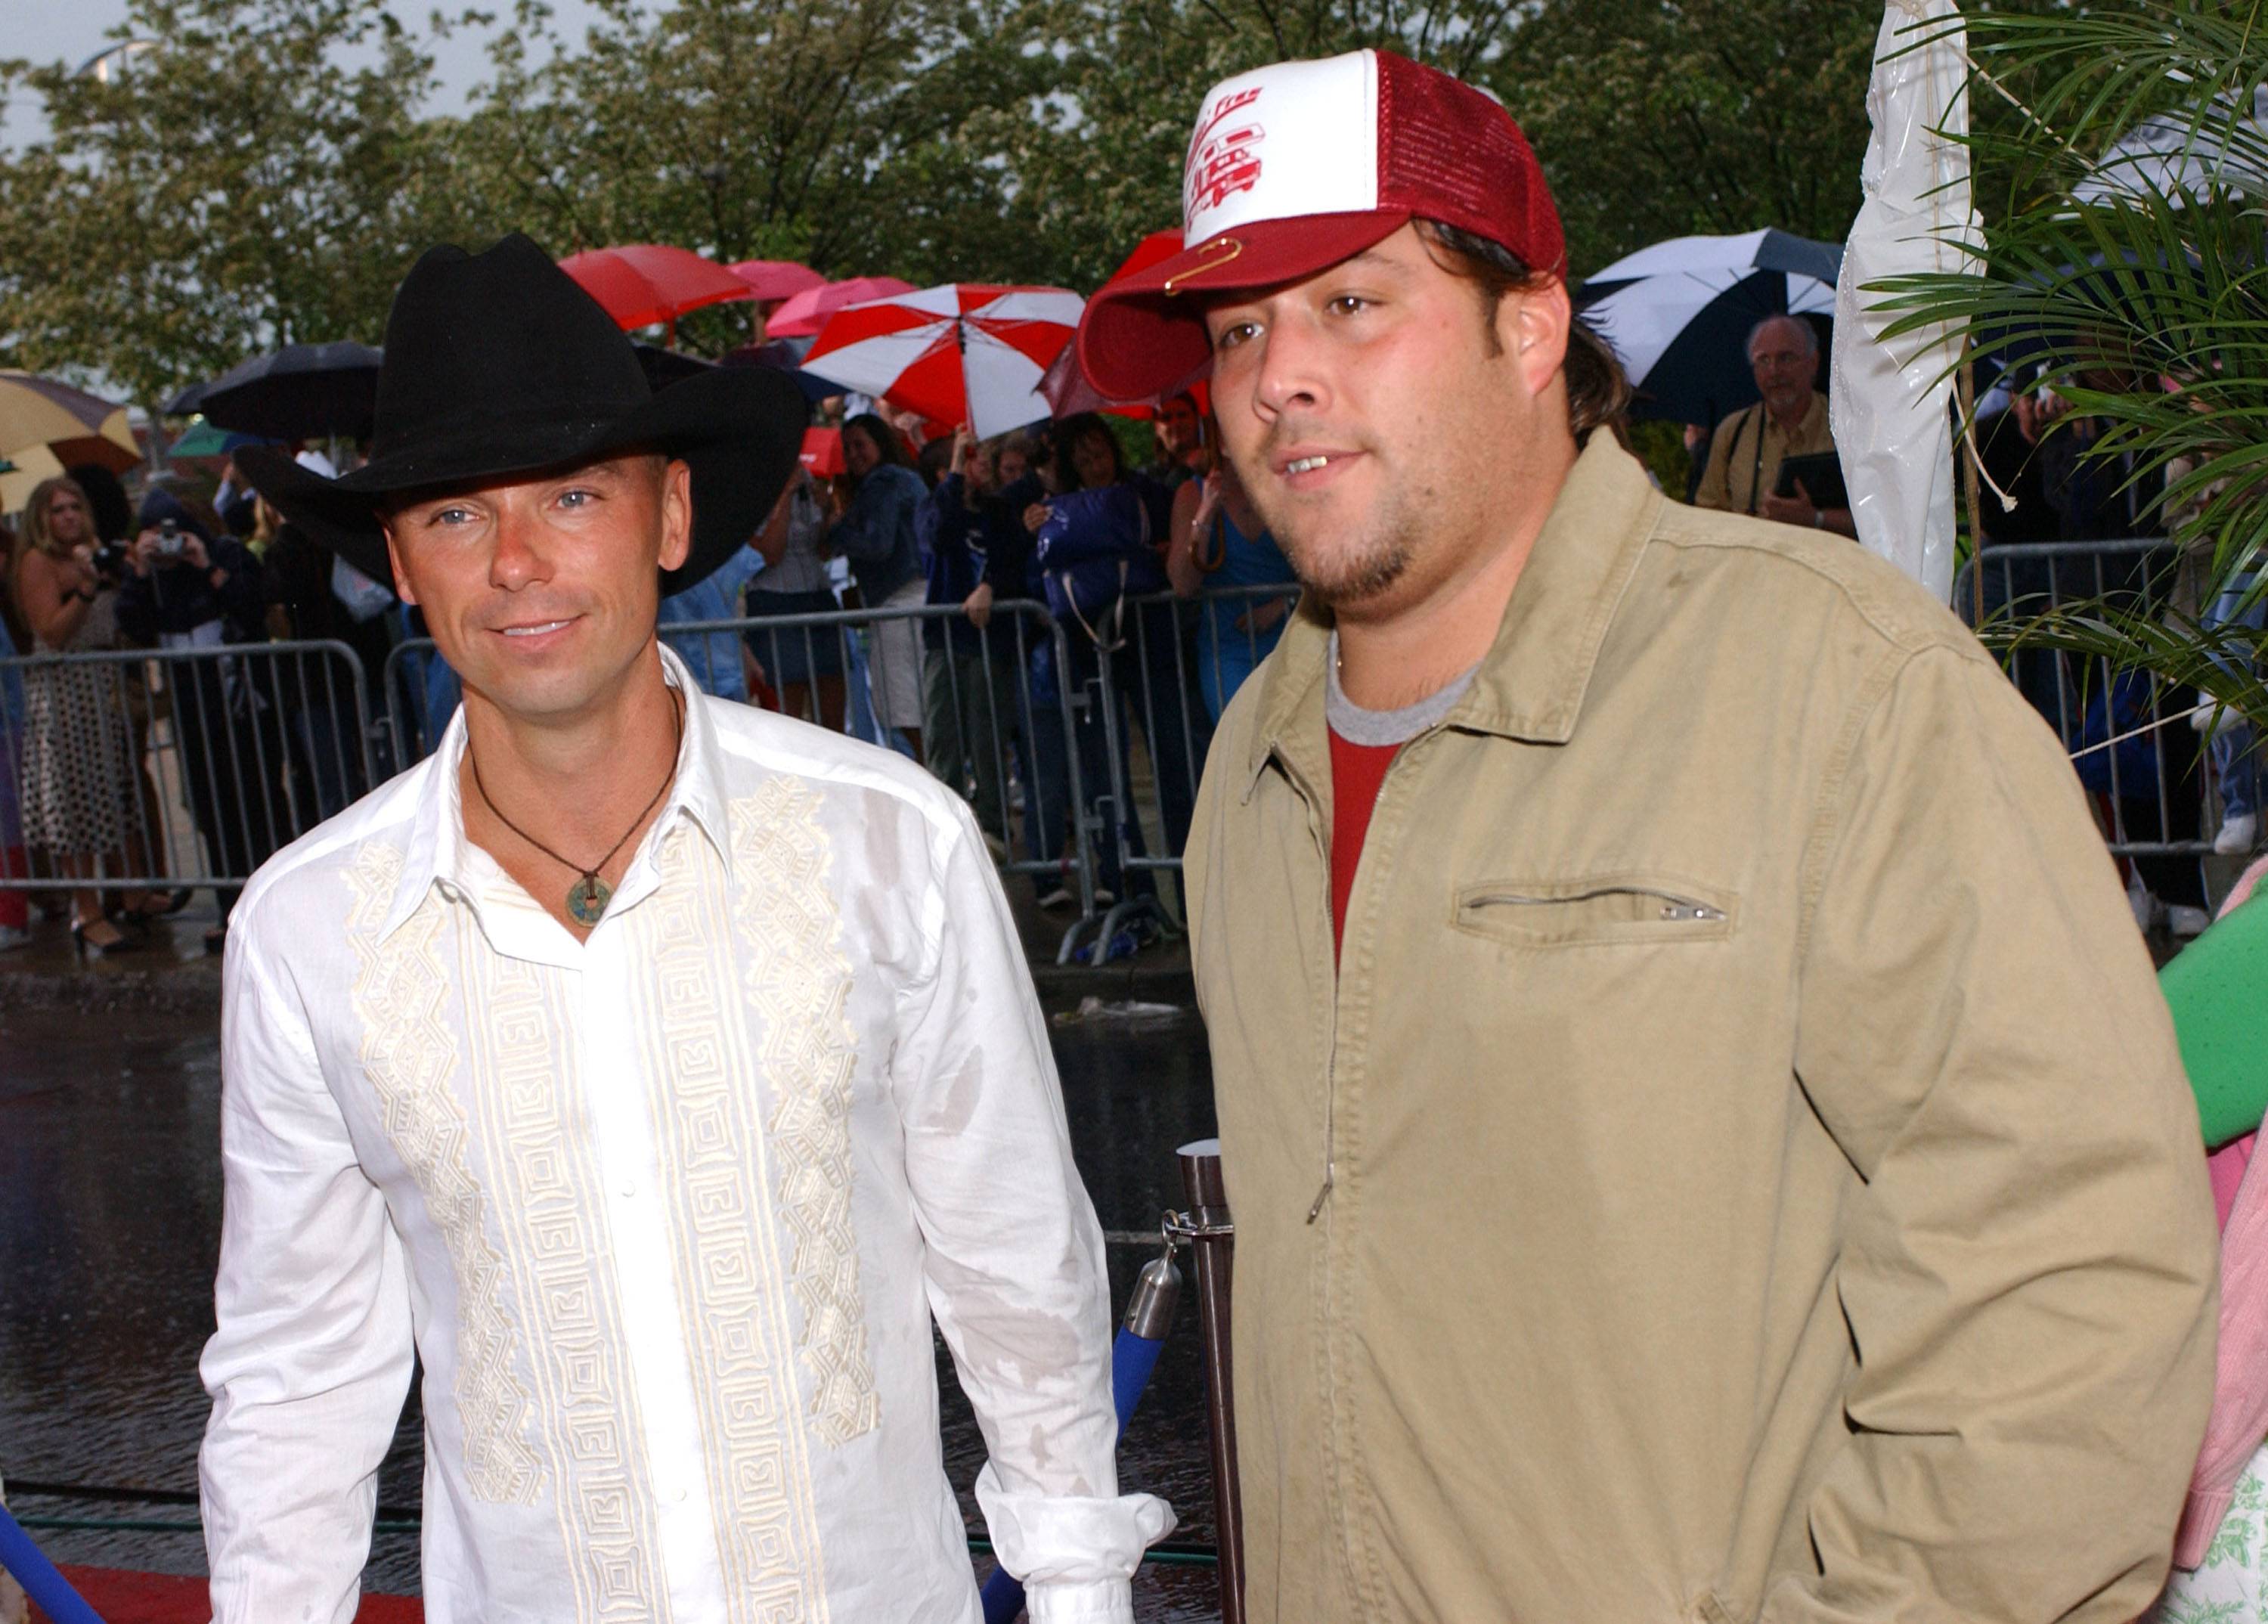 Kenny Chesney and Uncle Kracker during CMT 2004 Flame Worthy Video Music Awards - Arrivals at Gaylord Entertainment Center in Nashville, Tennessee, United States. 
